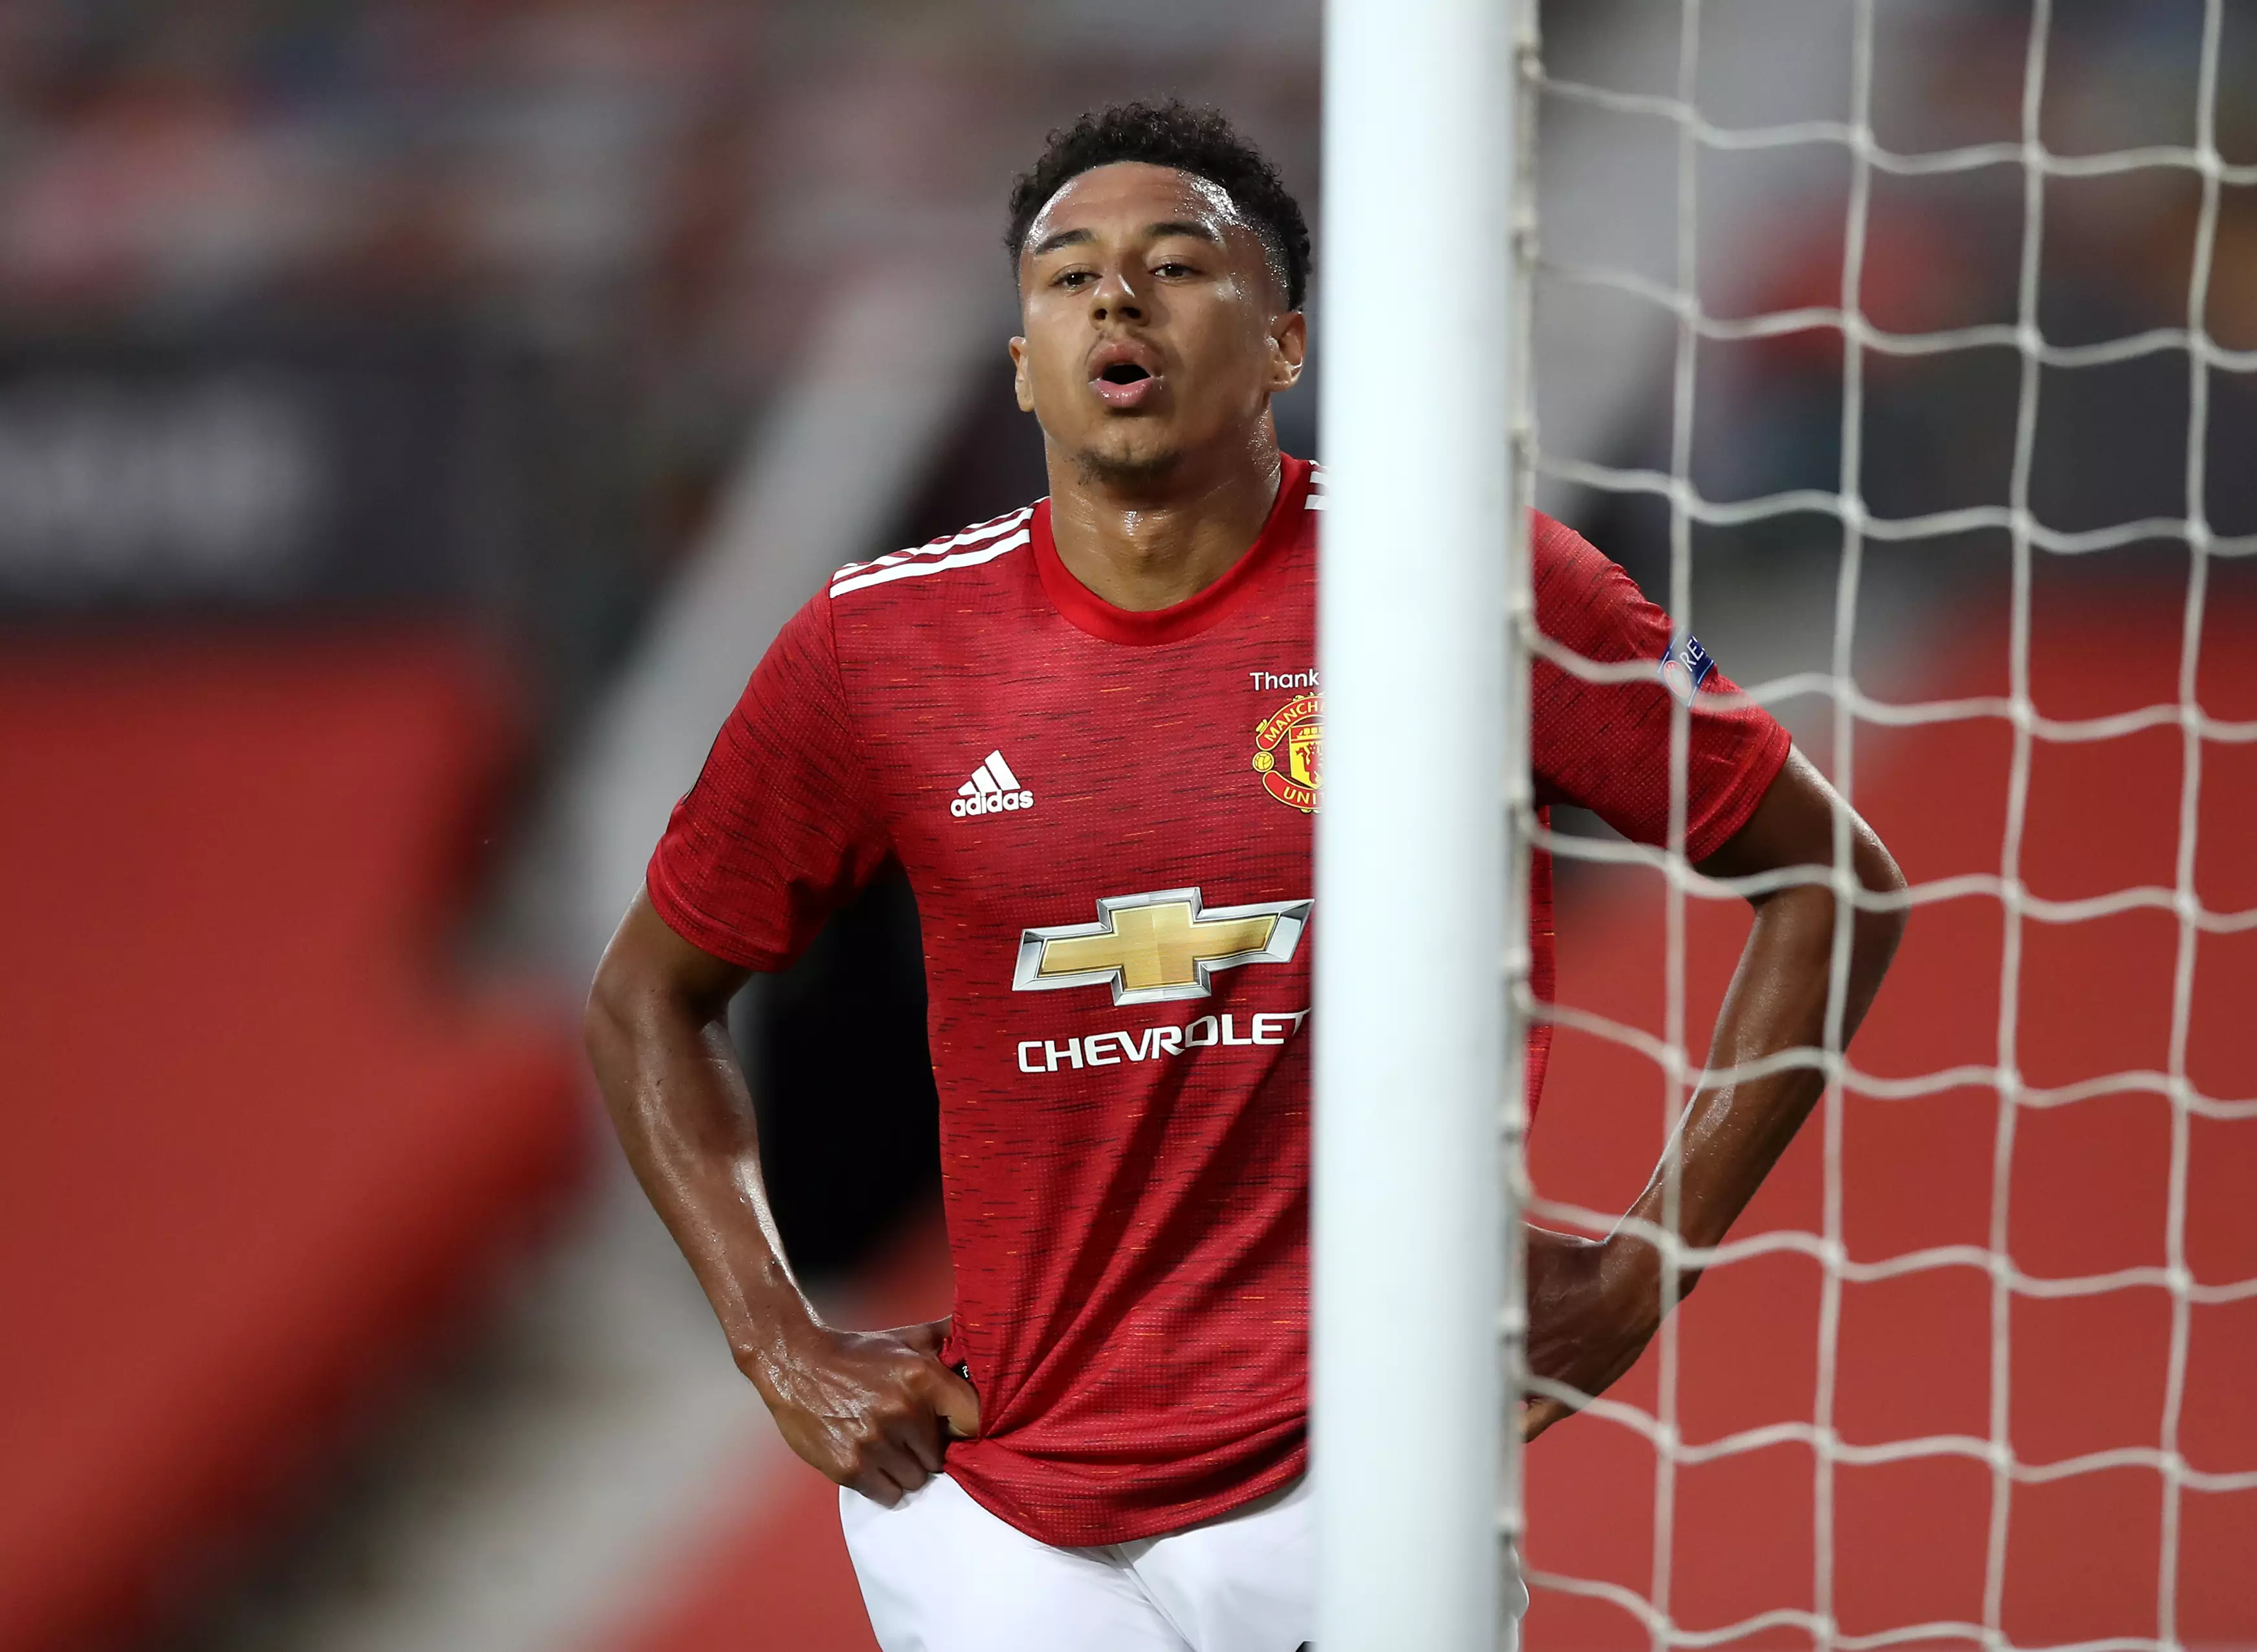 Lingard's form had totally fallen away at Old Trafford. Image: PA Images